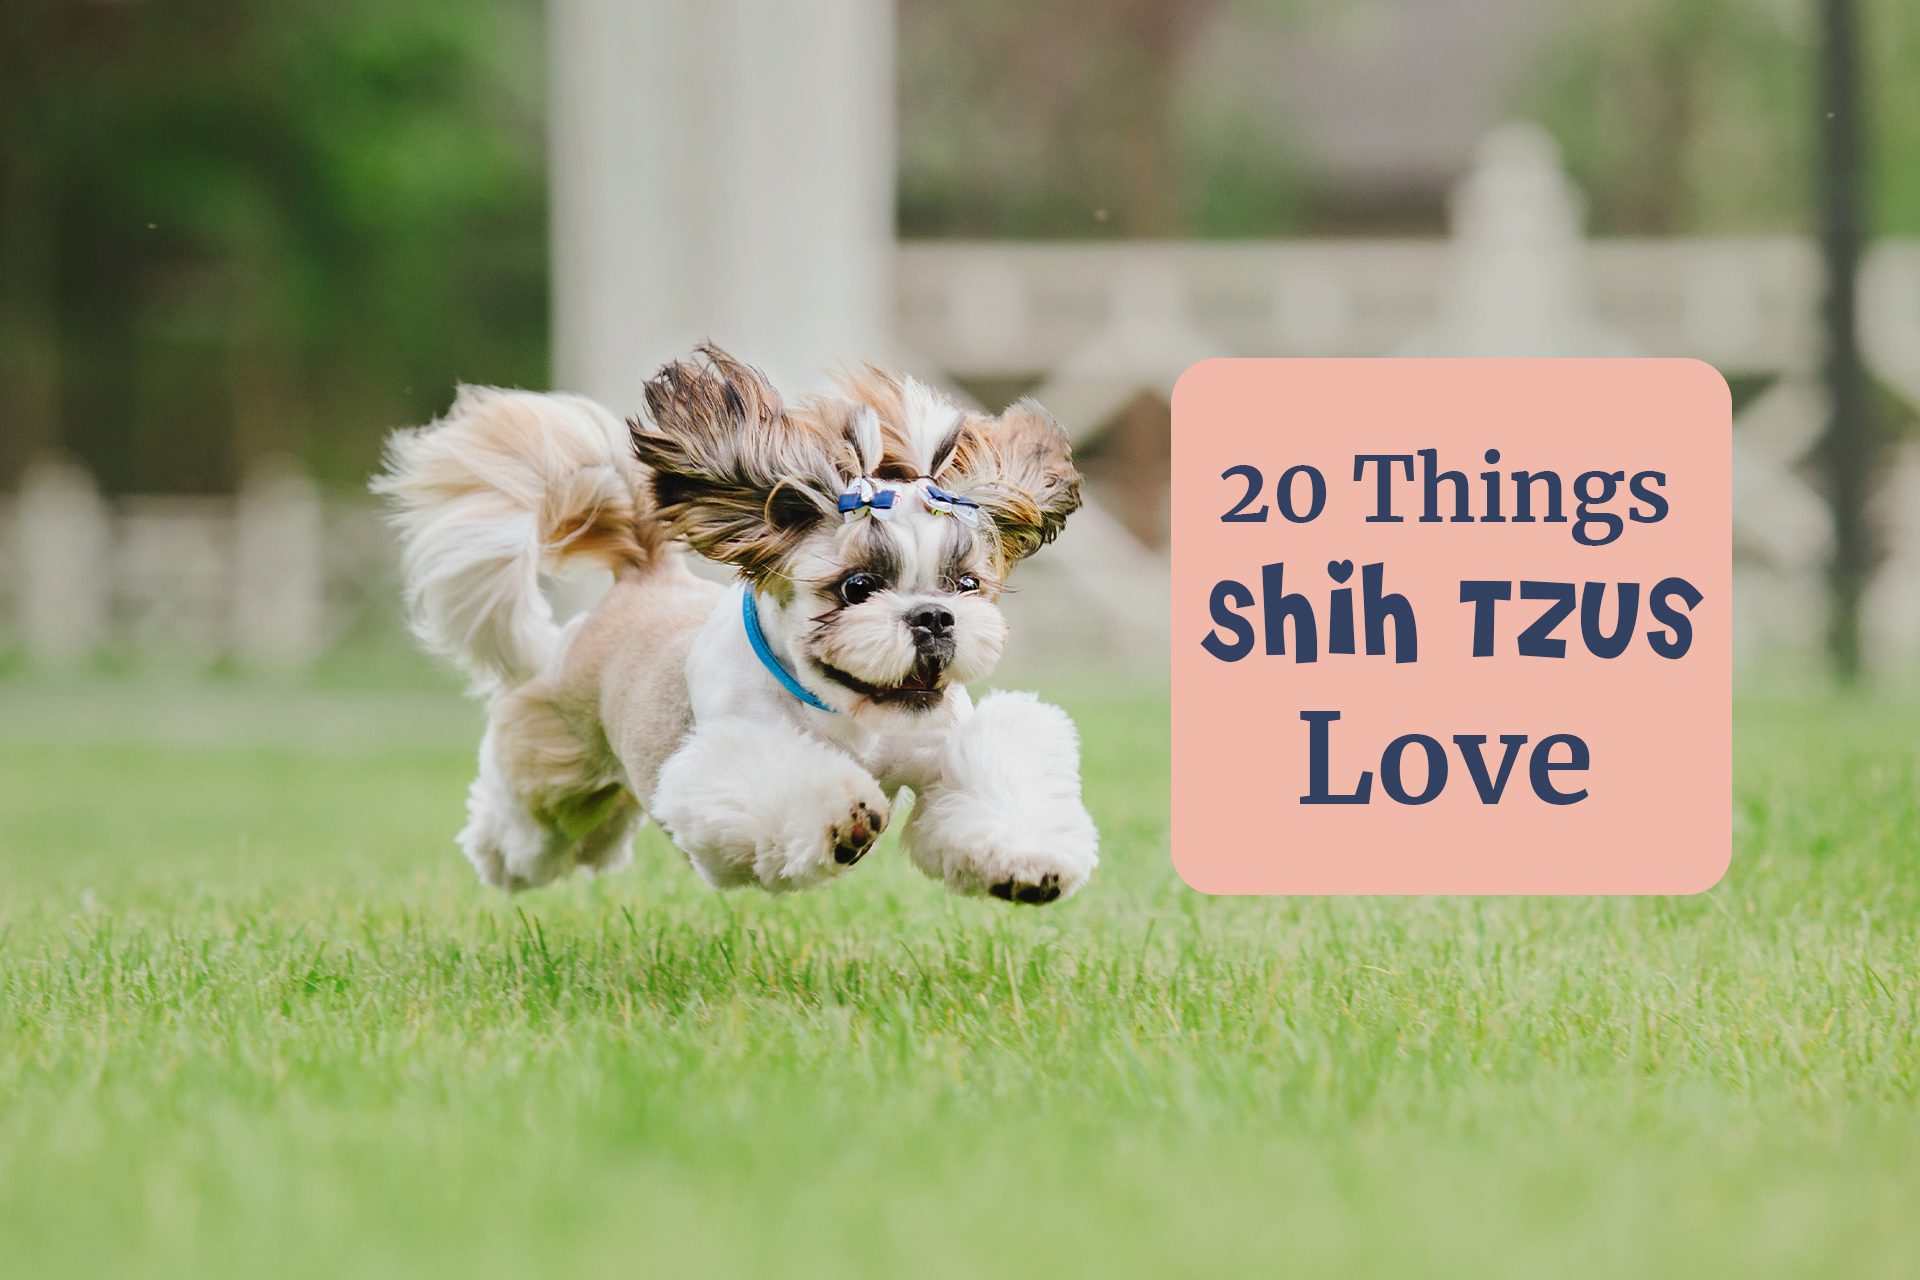 What are the things Shih Tzus love to do? There are 20 things that Shih Tzus love to do; including swimming, playing fetch, long walks. digging, eating, sleeping and the list goes on.